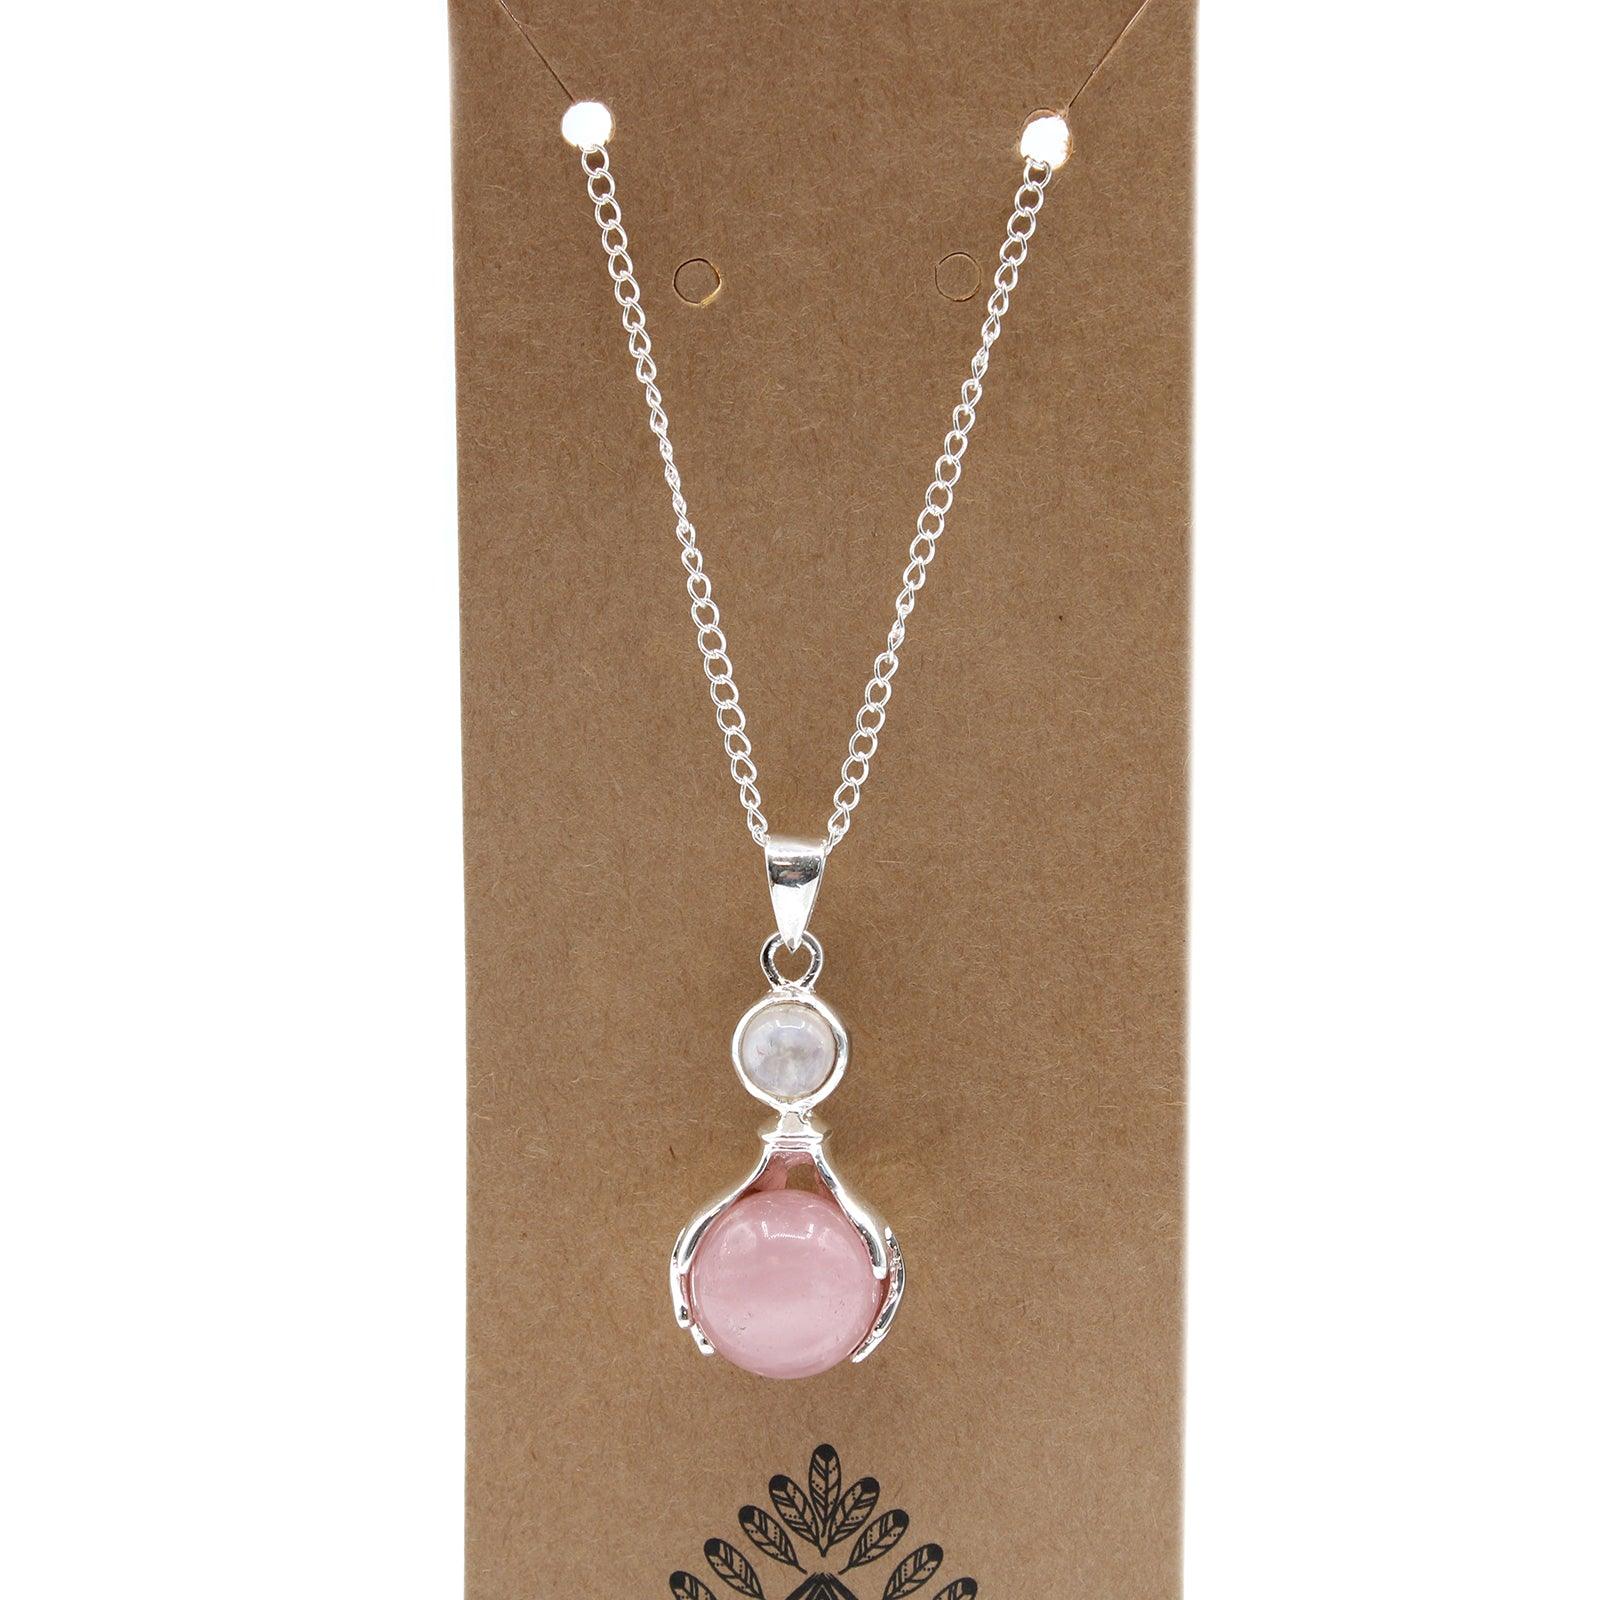 Gemstone Healing Hands Pendant Necklace - Rose Quartz - Free Pouch - Home Inspired Gifts